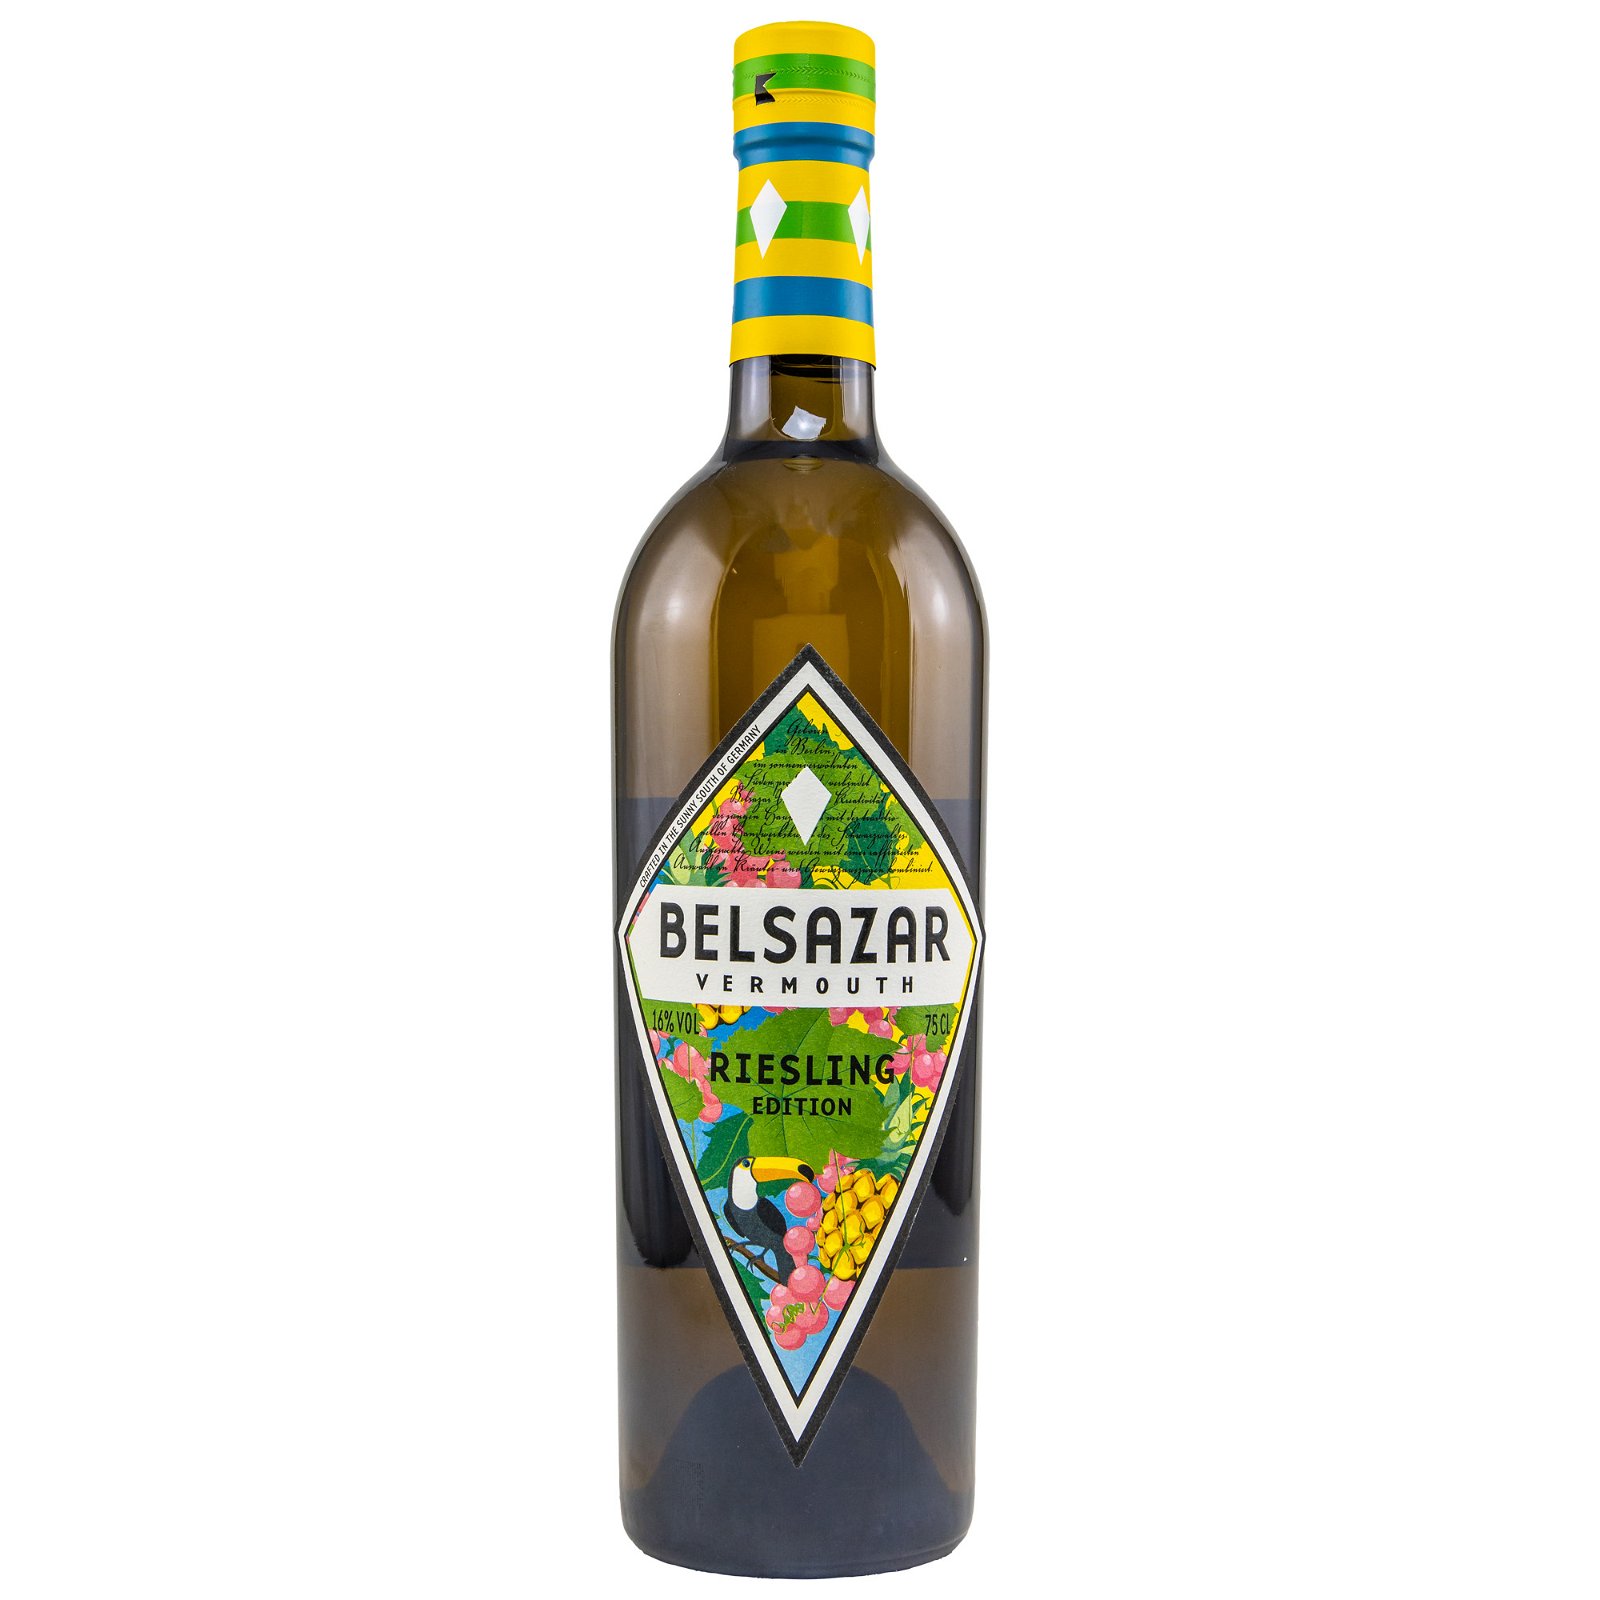 Belsazar Vermouth Riesling Edition